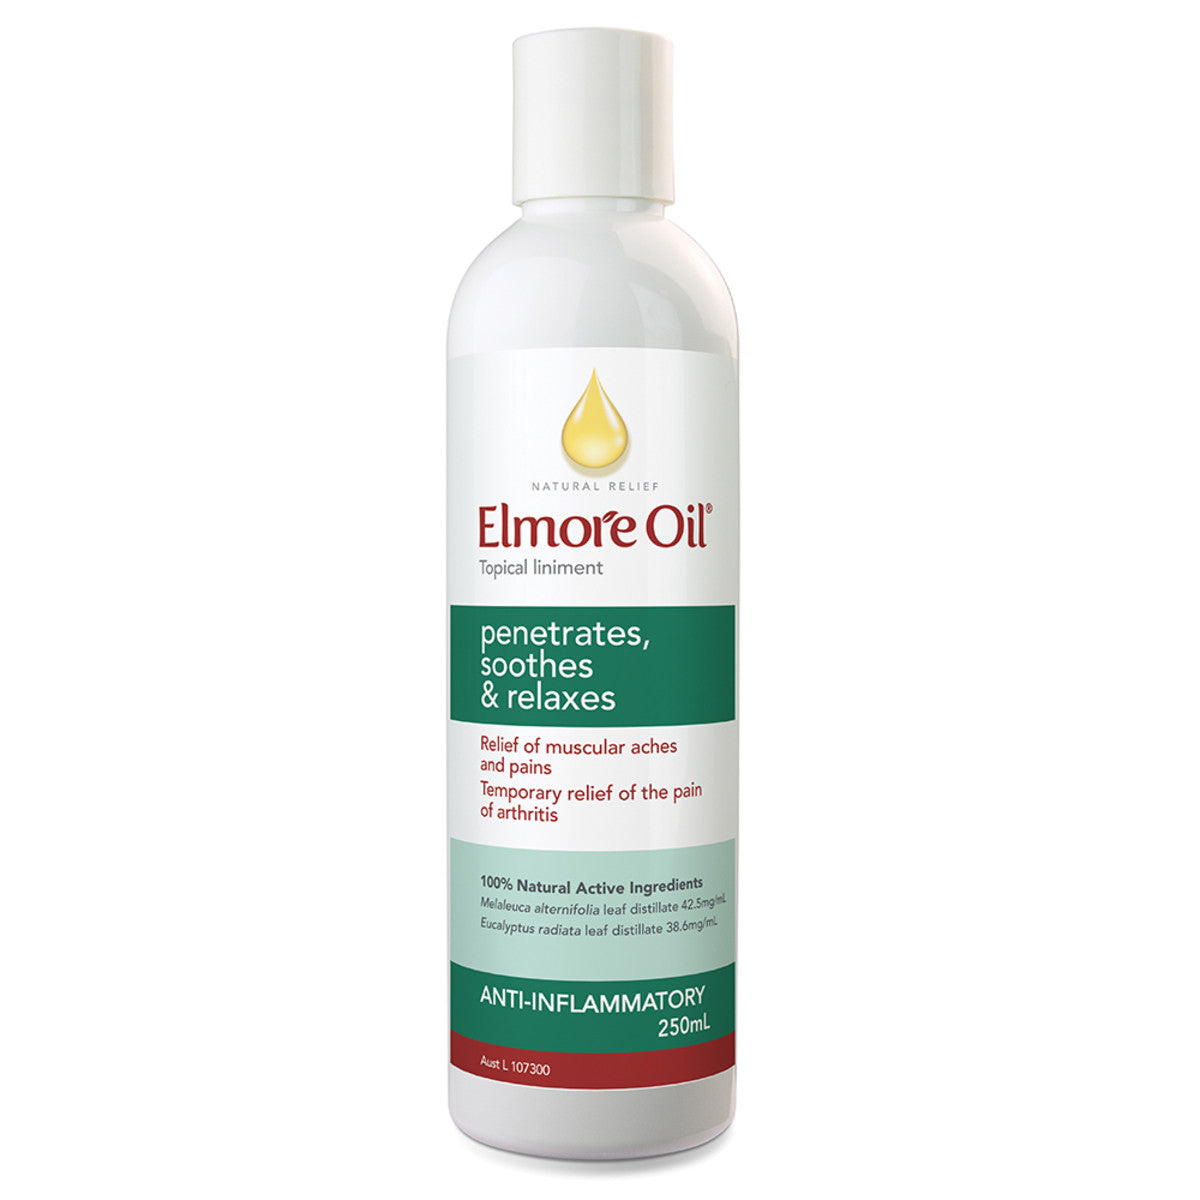 Elmore Oil - Natural Relief Topical Liniment Anti-Inflammatory